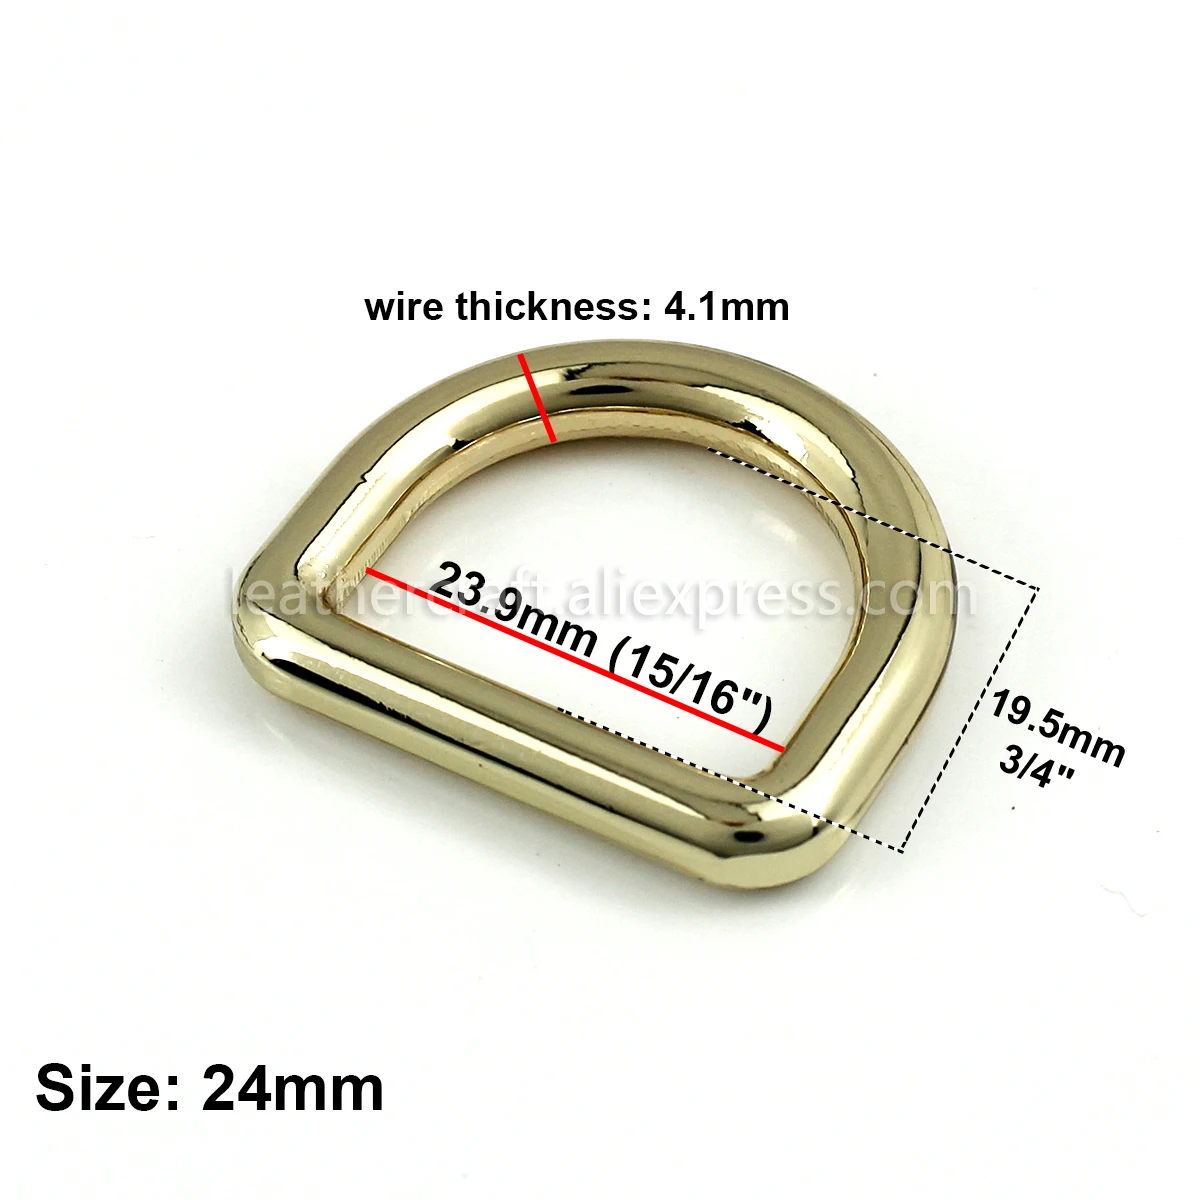 Solid Brass D-Ring for Leather Goods, Handbags, Dog Collars, Accessories & More | | (2011-1E-EDDOEB-LL)